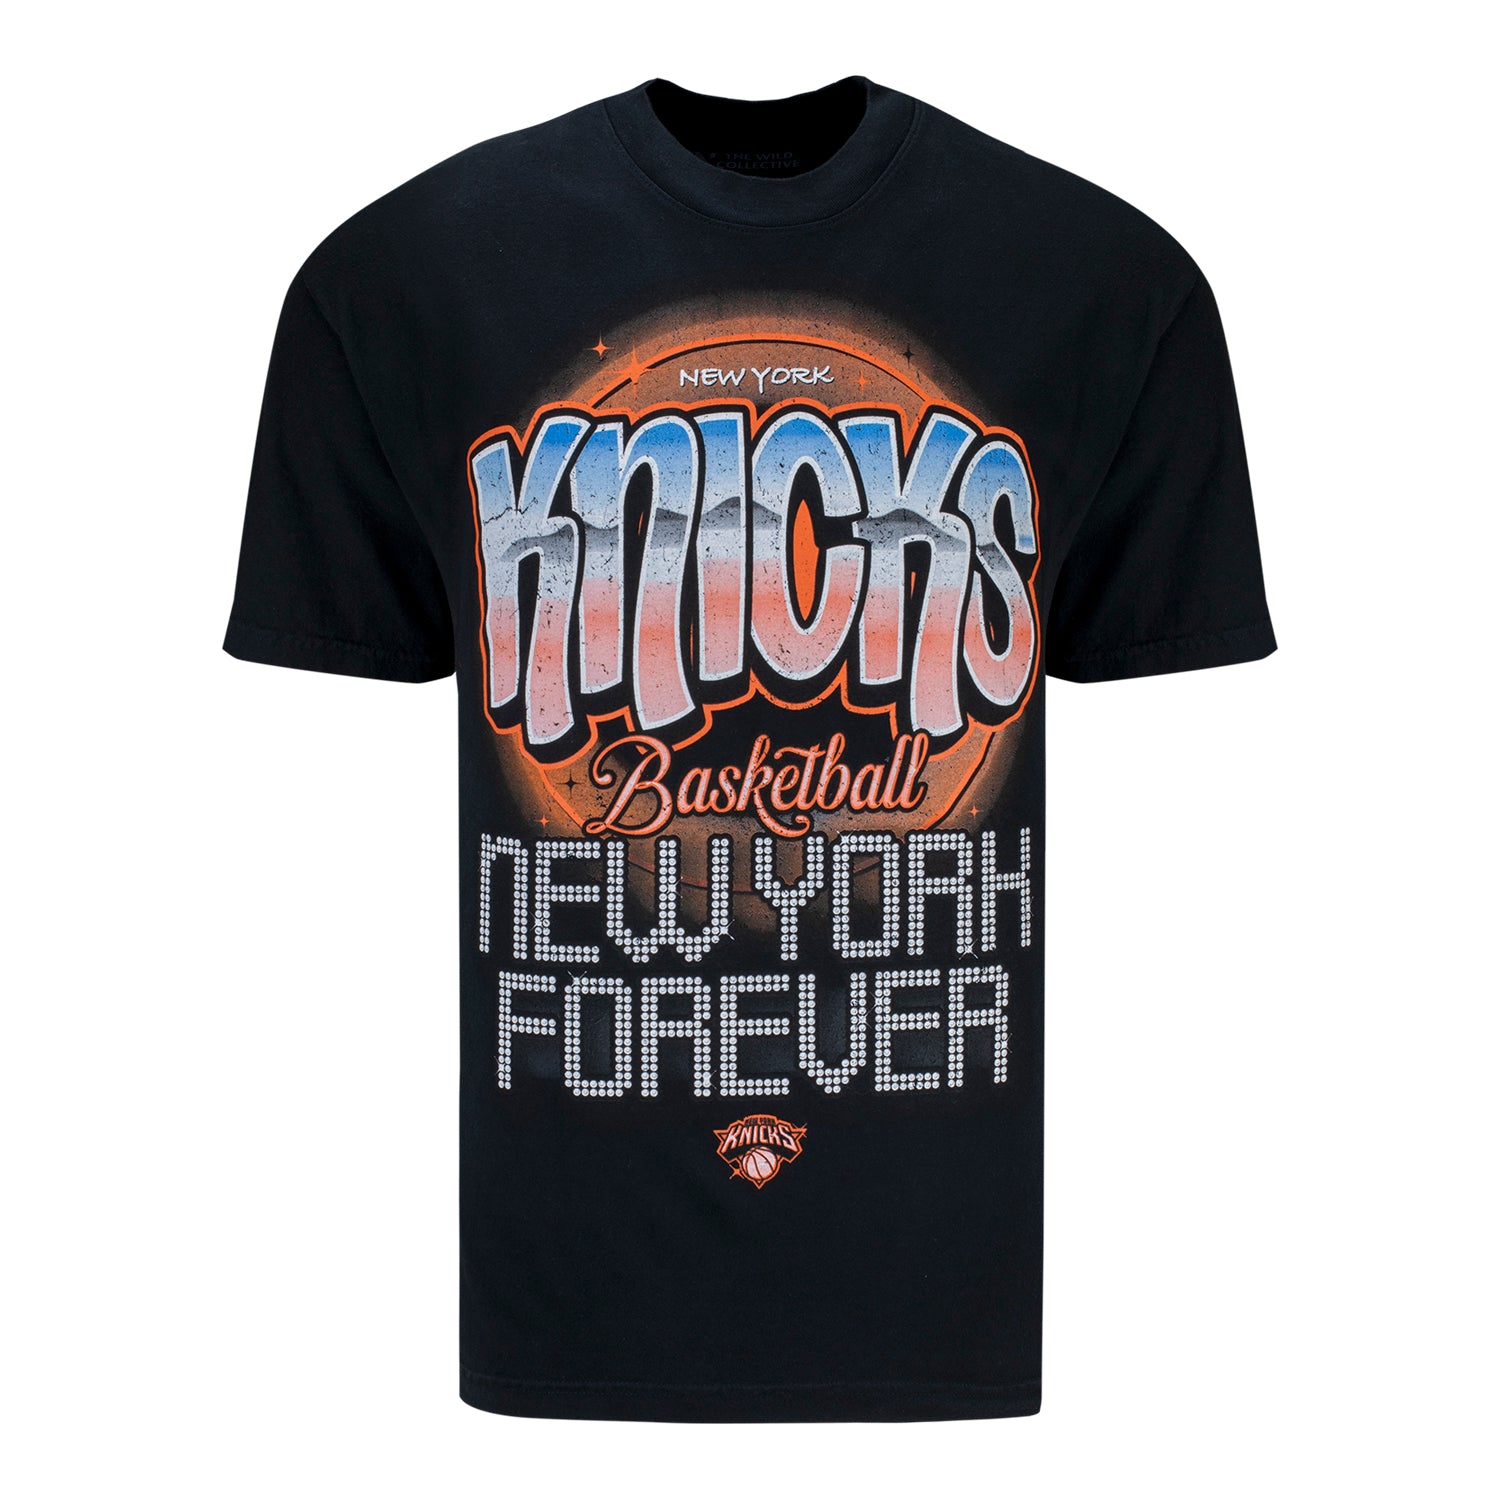 The Wild Collective Knicks NY Forever Band T-Shirt